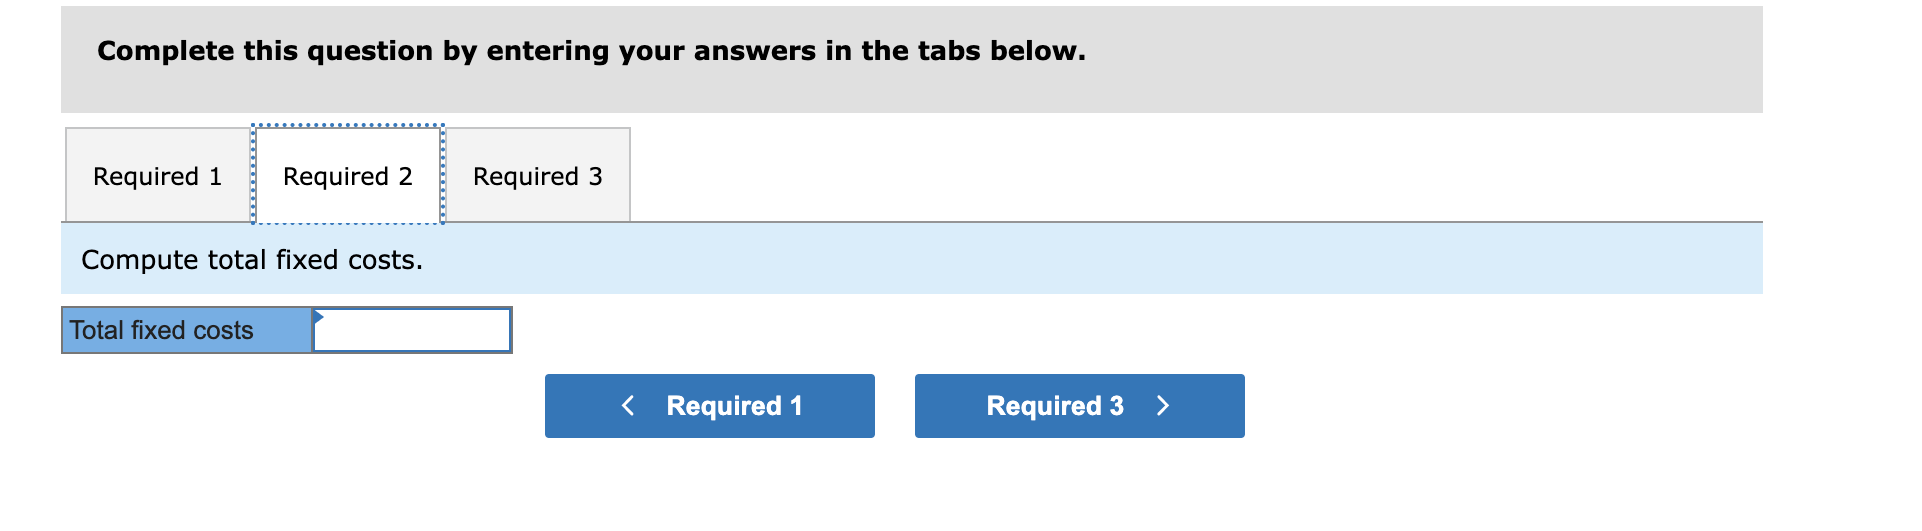 Complete this question by entering your answers in the tabs below. Required 1 Required 2 Required 3 Compute total fixed costs